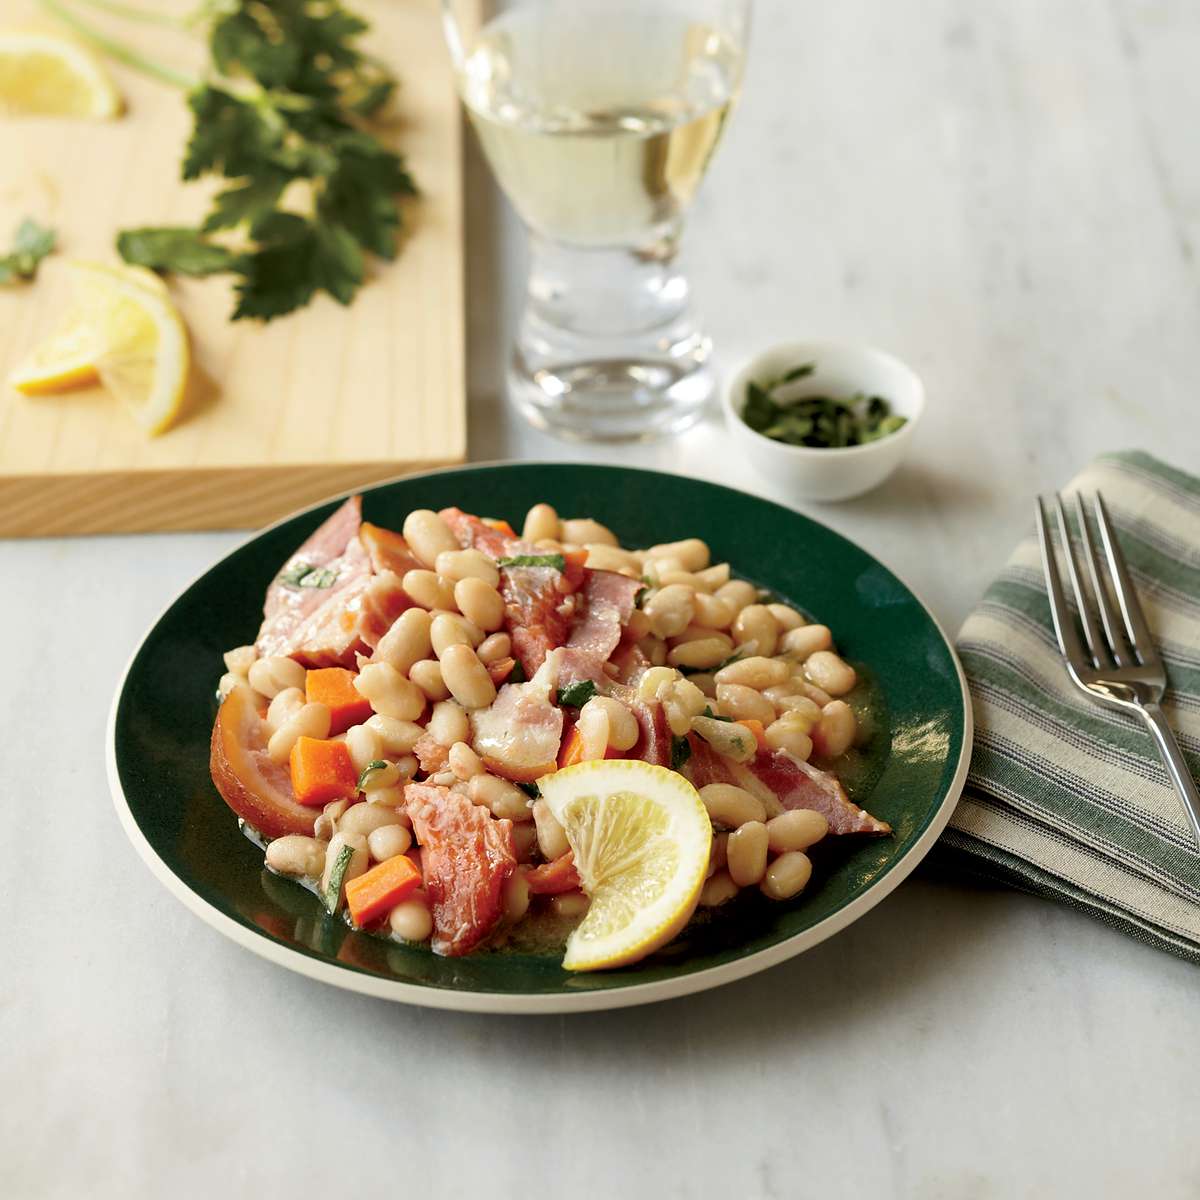 Warm White Bean Salad with Smoked Trout 